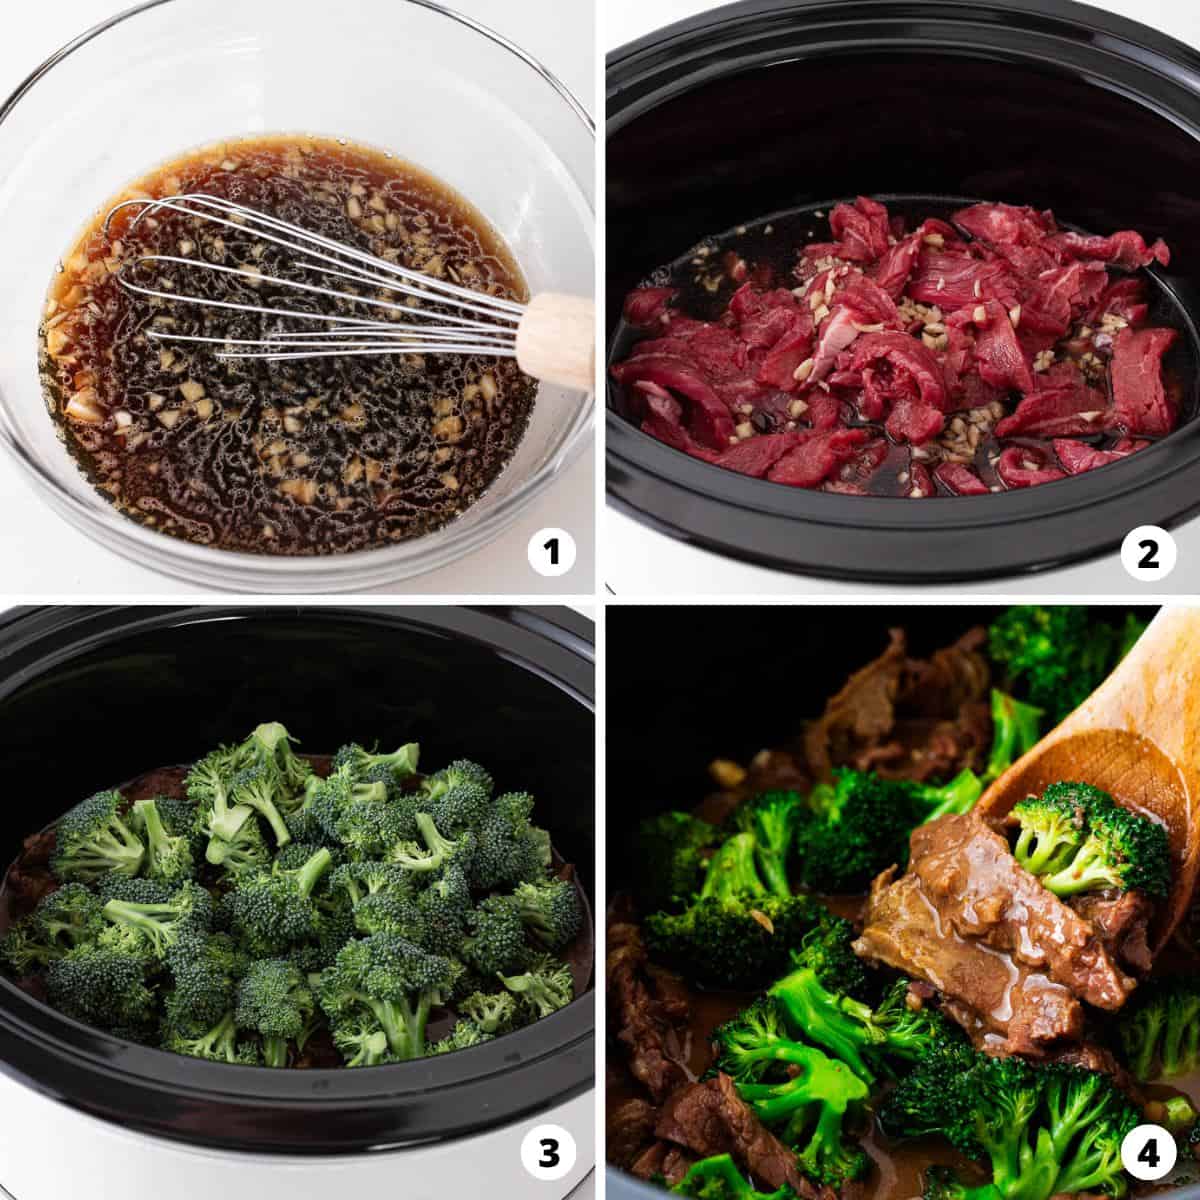 Showing how to make beef and broccoli in a 4 step collage.